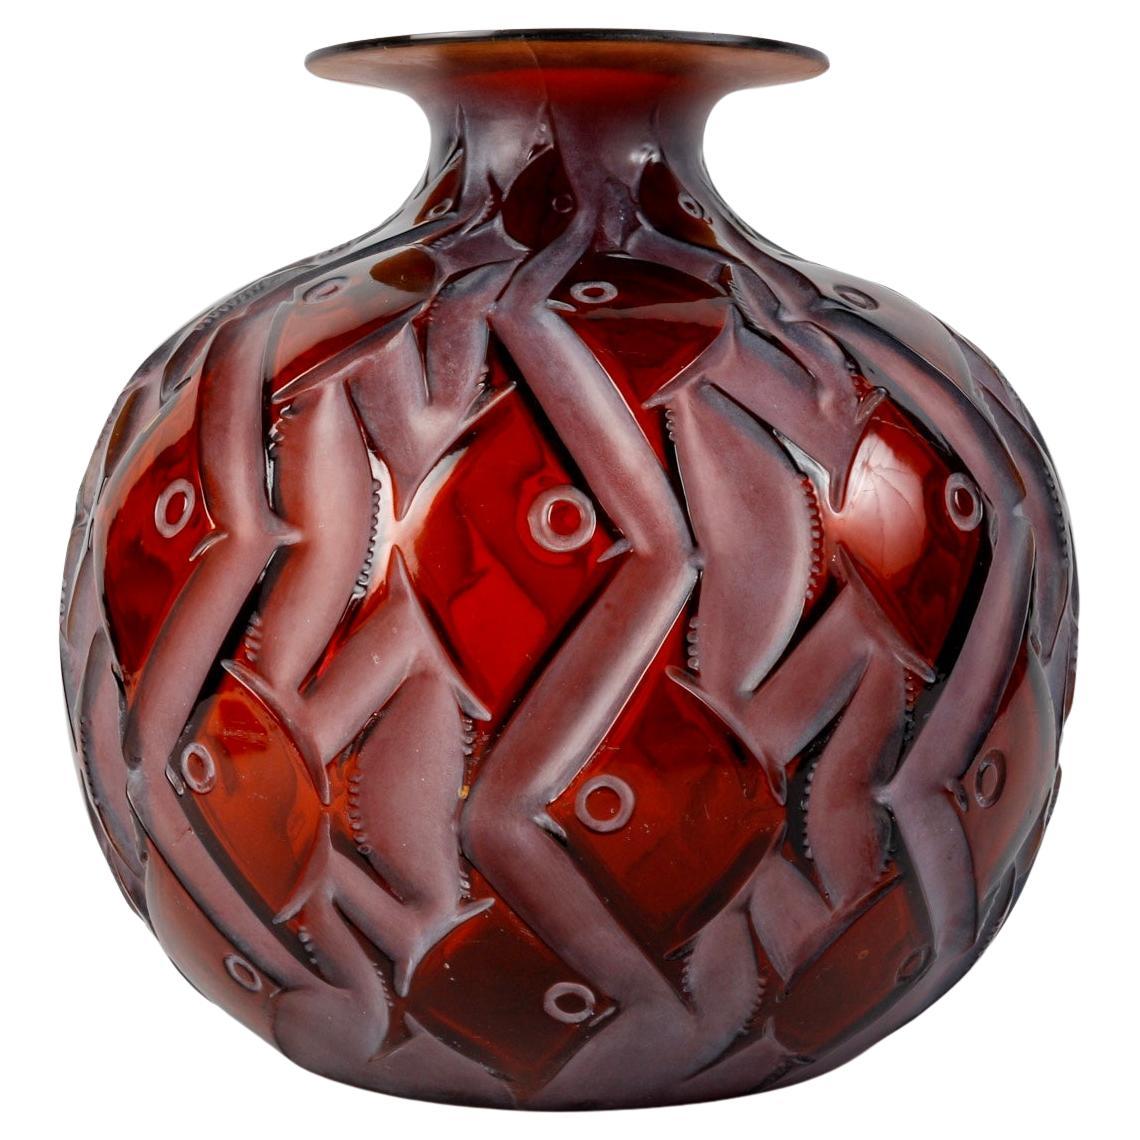 1928 Rene Lalique - Vase Penthievre Red Amber Glass with White Patina